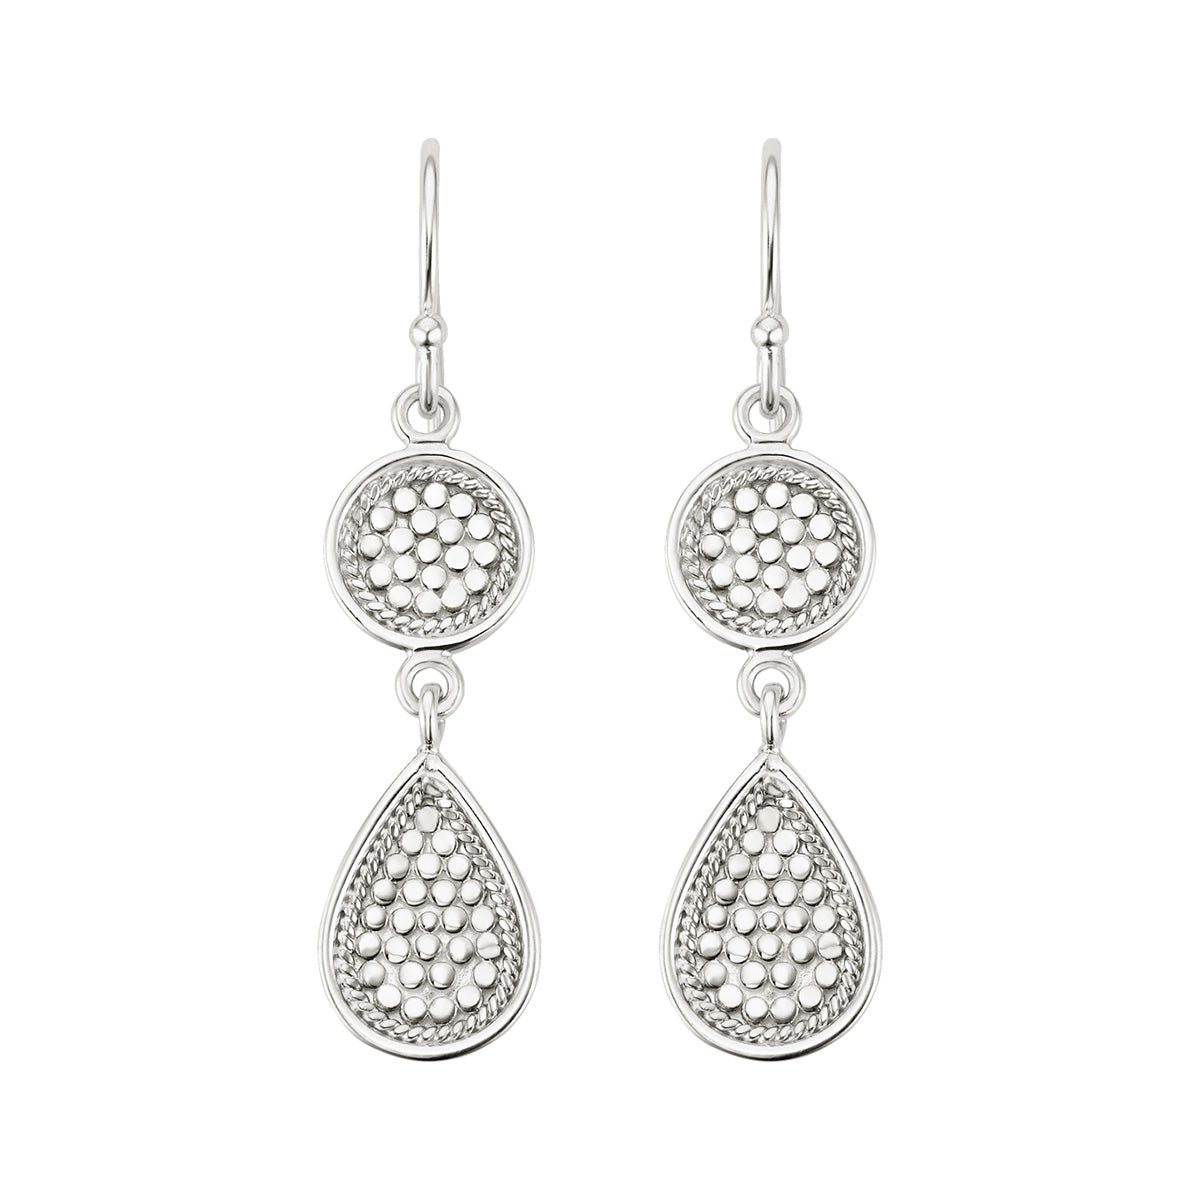 Ana Beck Sterling Silver Double Drop Earrings - Silver